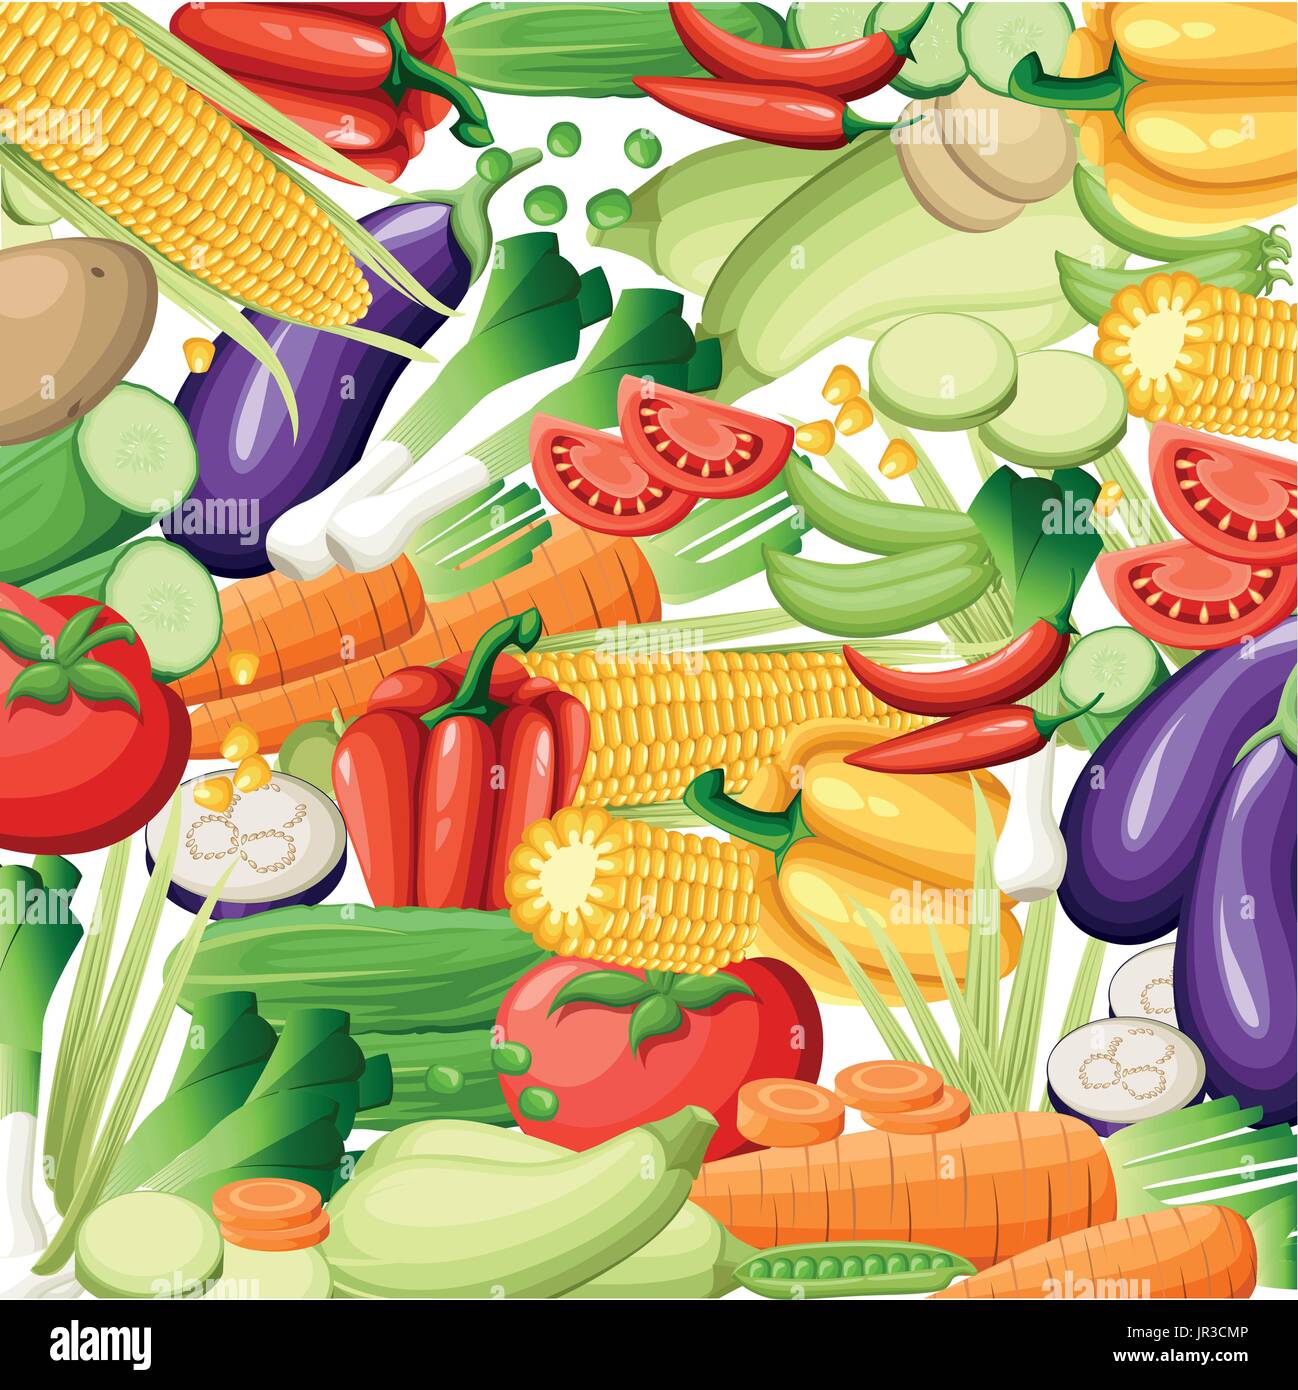 Vector fruits and vegetables seamless pattern or background. Fruits and vegetables design elements and icons for web, stores, package and advertising  Stock Vector